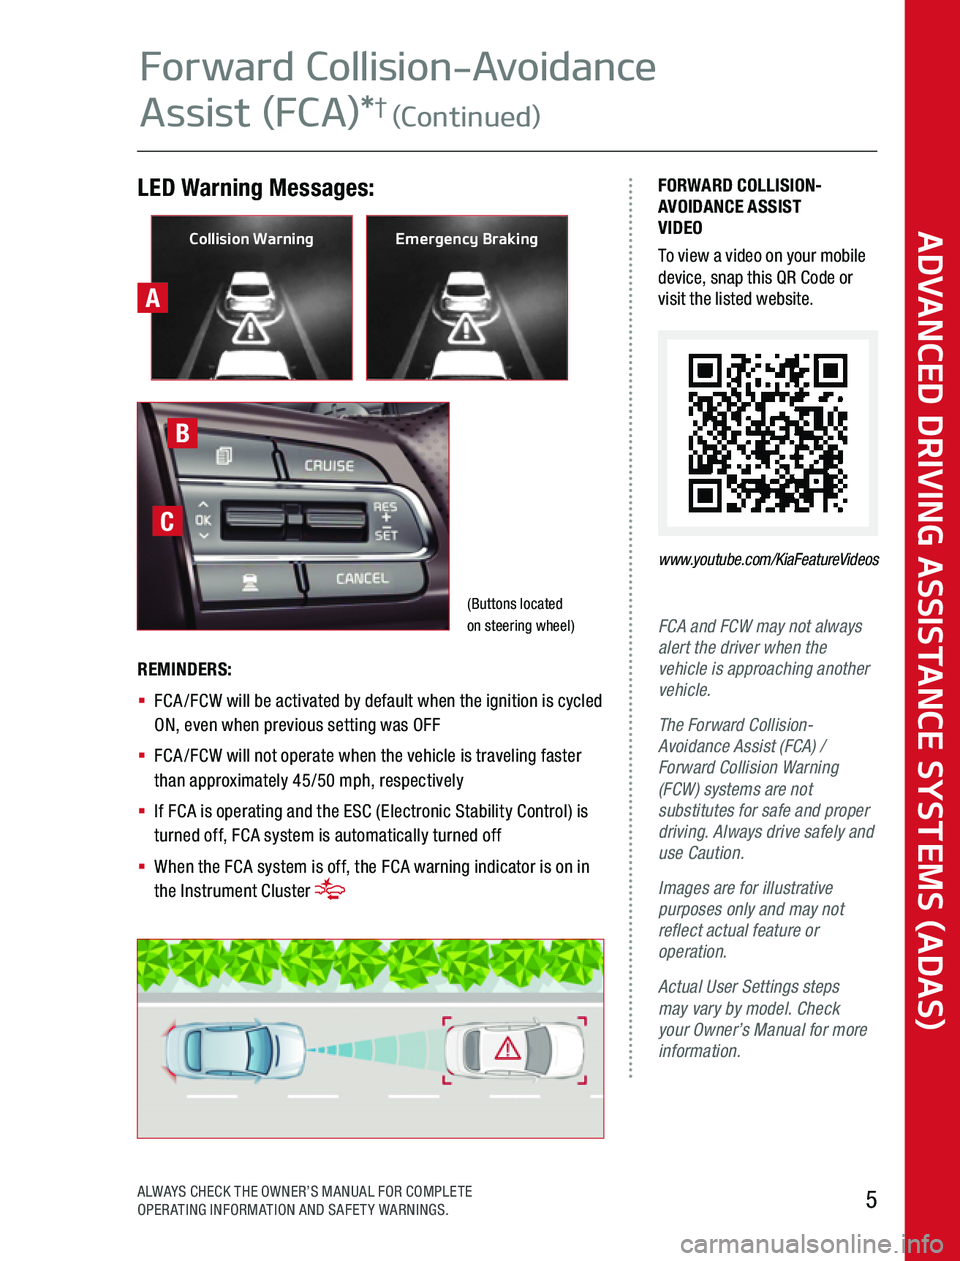 KIA K900 2020  Advanced Driving Assistance System A
LED Warning Messages:FORWARD COLLISION-AVOIDANCE ASSIST VIDEOTo view a video on your mobile device, snap this QR Code or visit the listed website 
www.youtube.com/KiaFeatureVideos
FCA and FCW may no